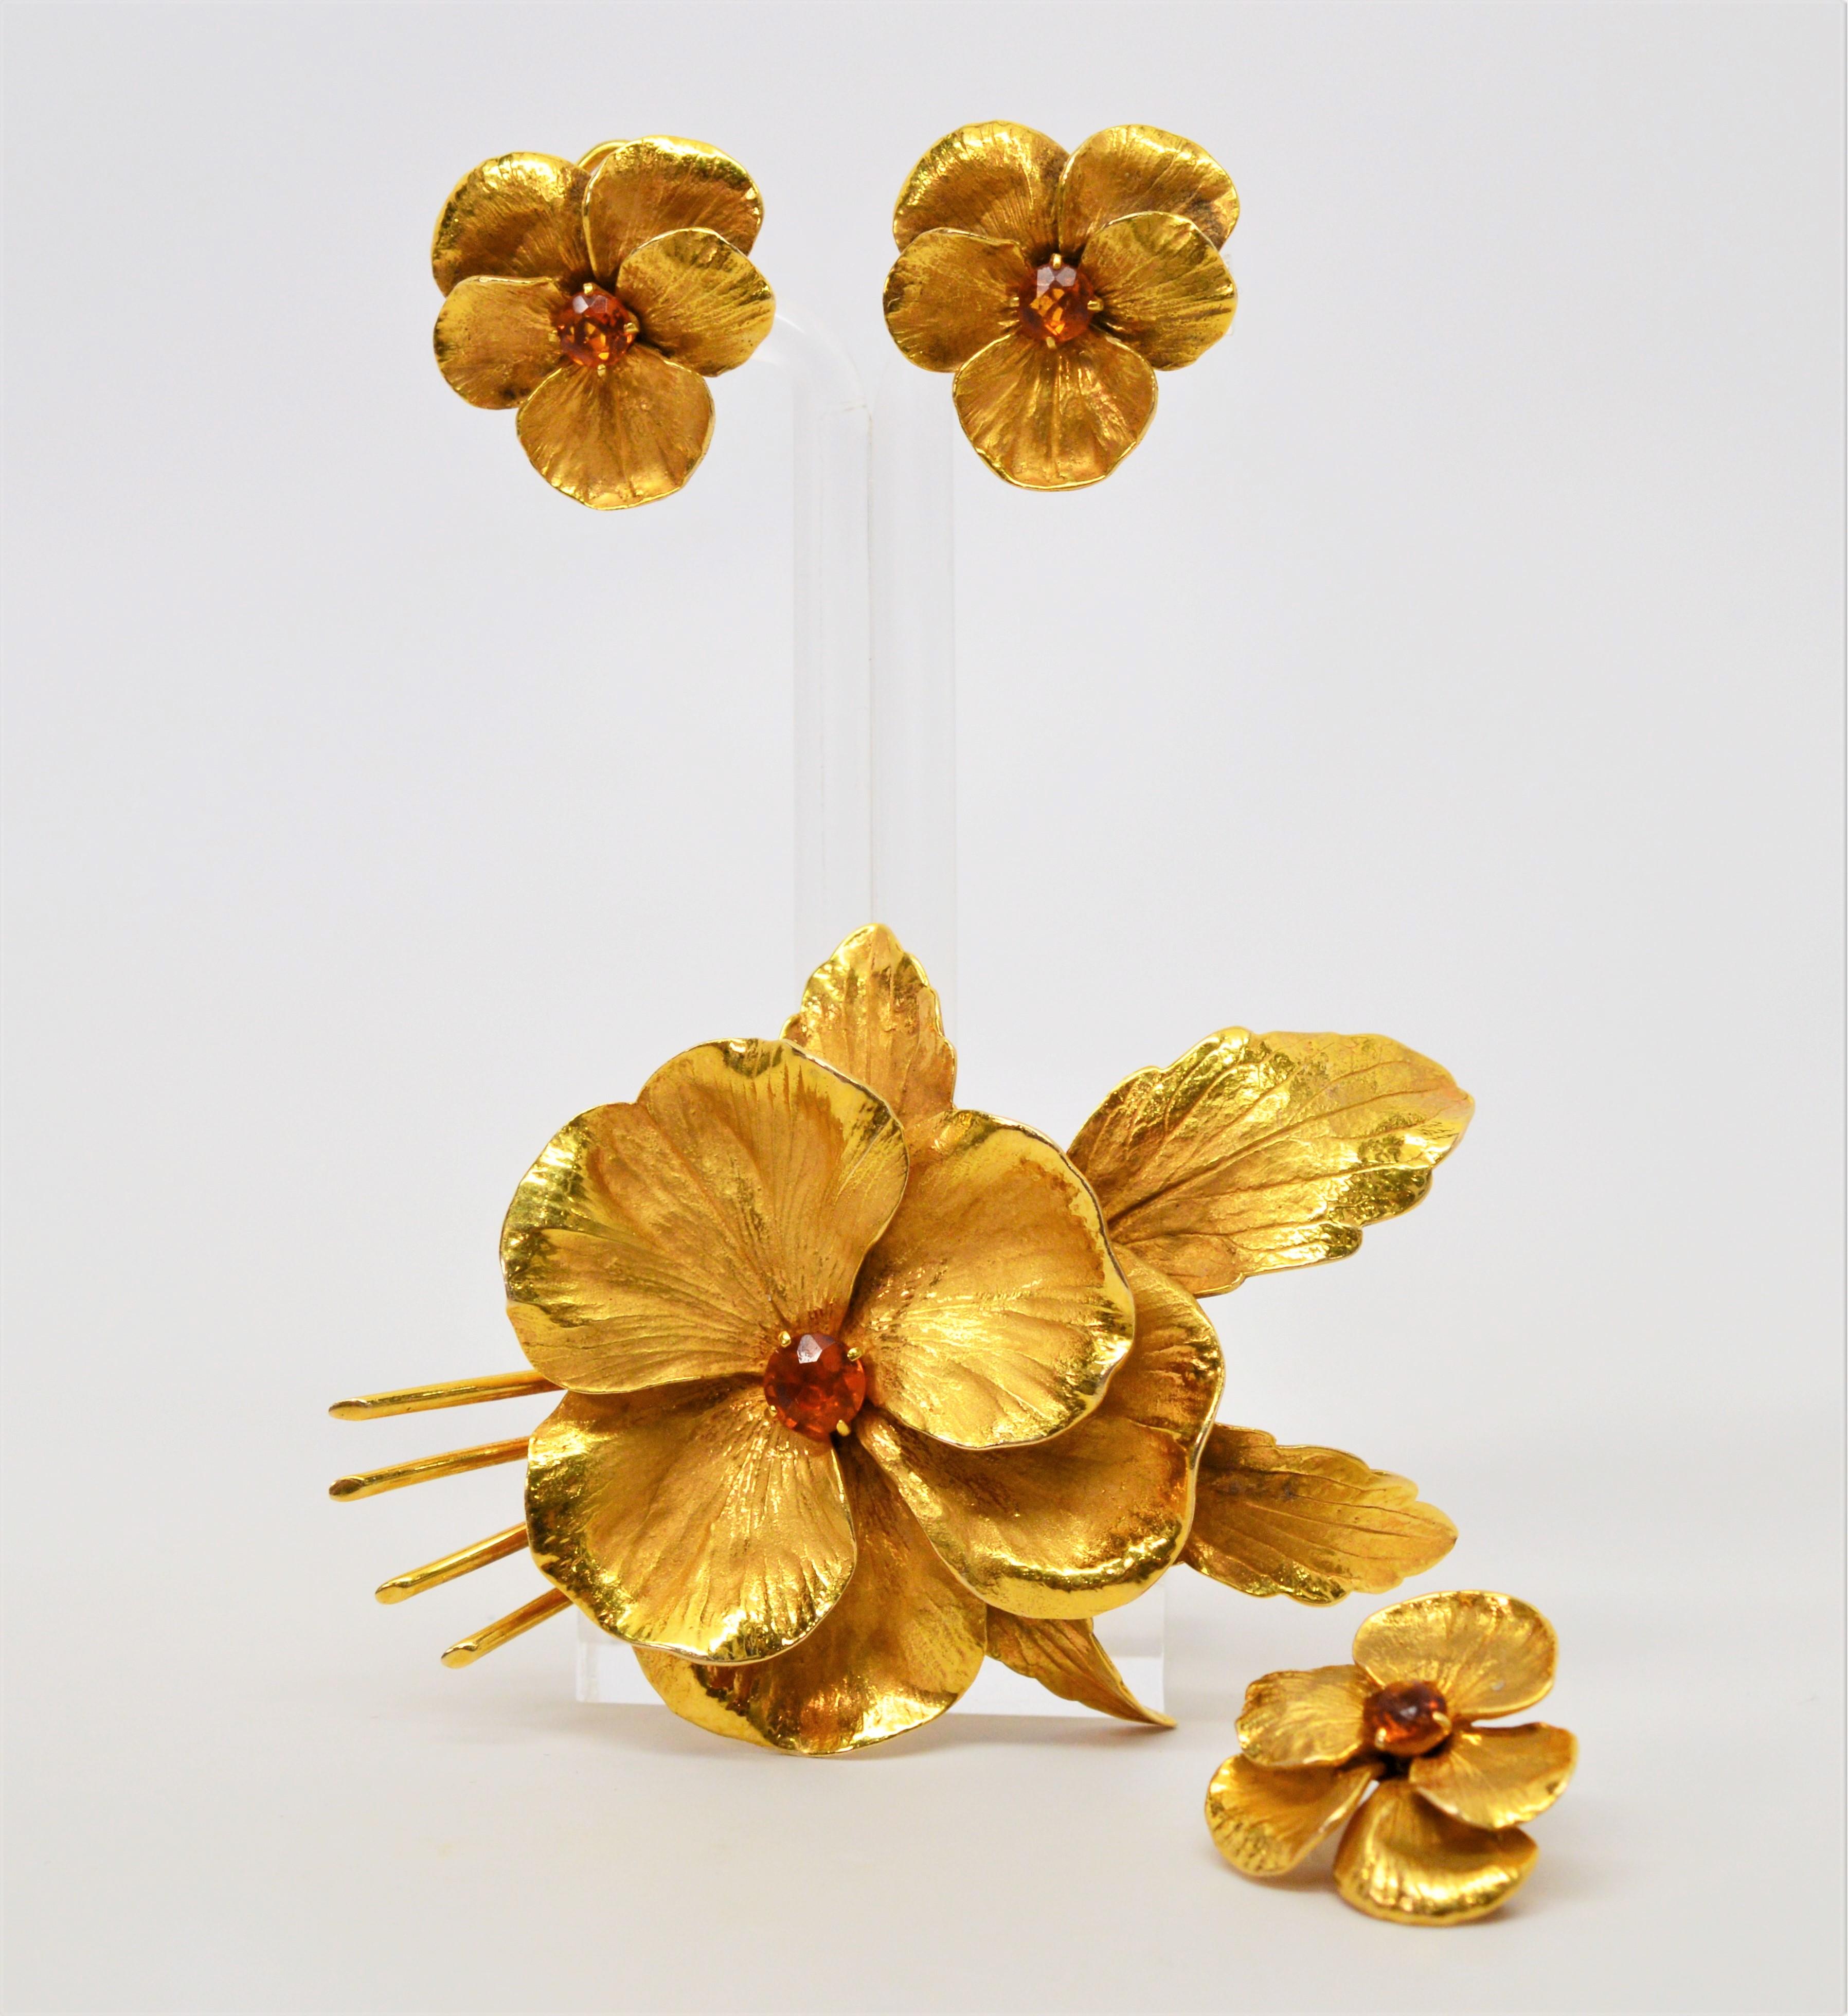 Each bloom displays spectacular detail in this floral suite of matching earrings and two brooch pins made of fourteen karat 14K yellow gold. 
Bright citrine centers adorned each floral bud. The feature brooch has pansy-like blossoms and is coupled